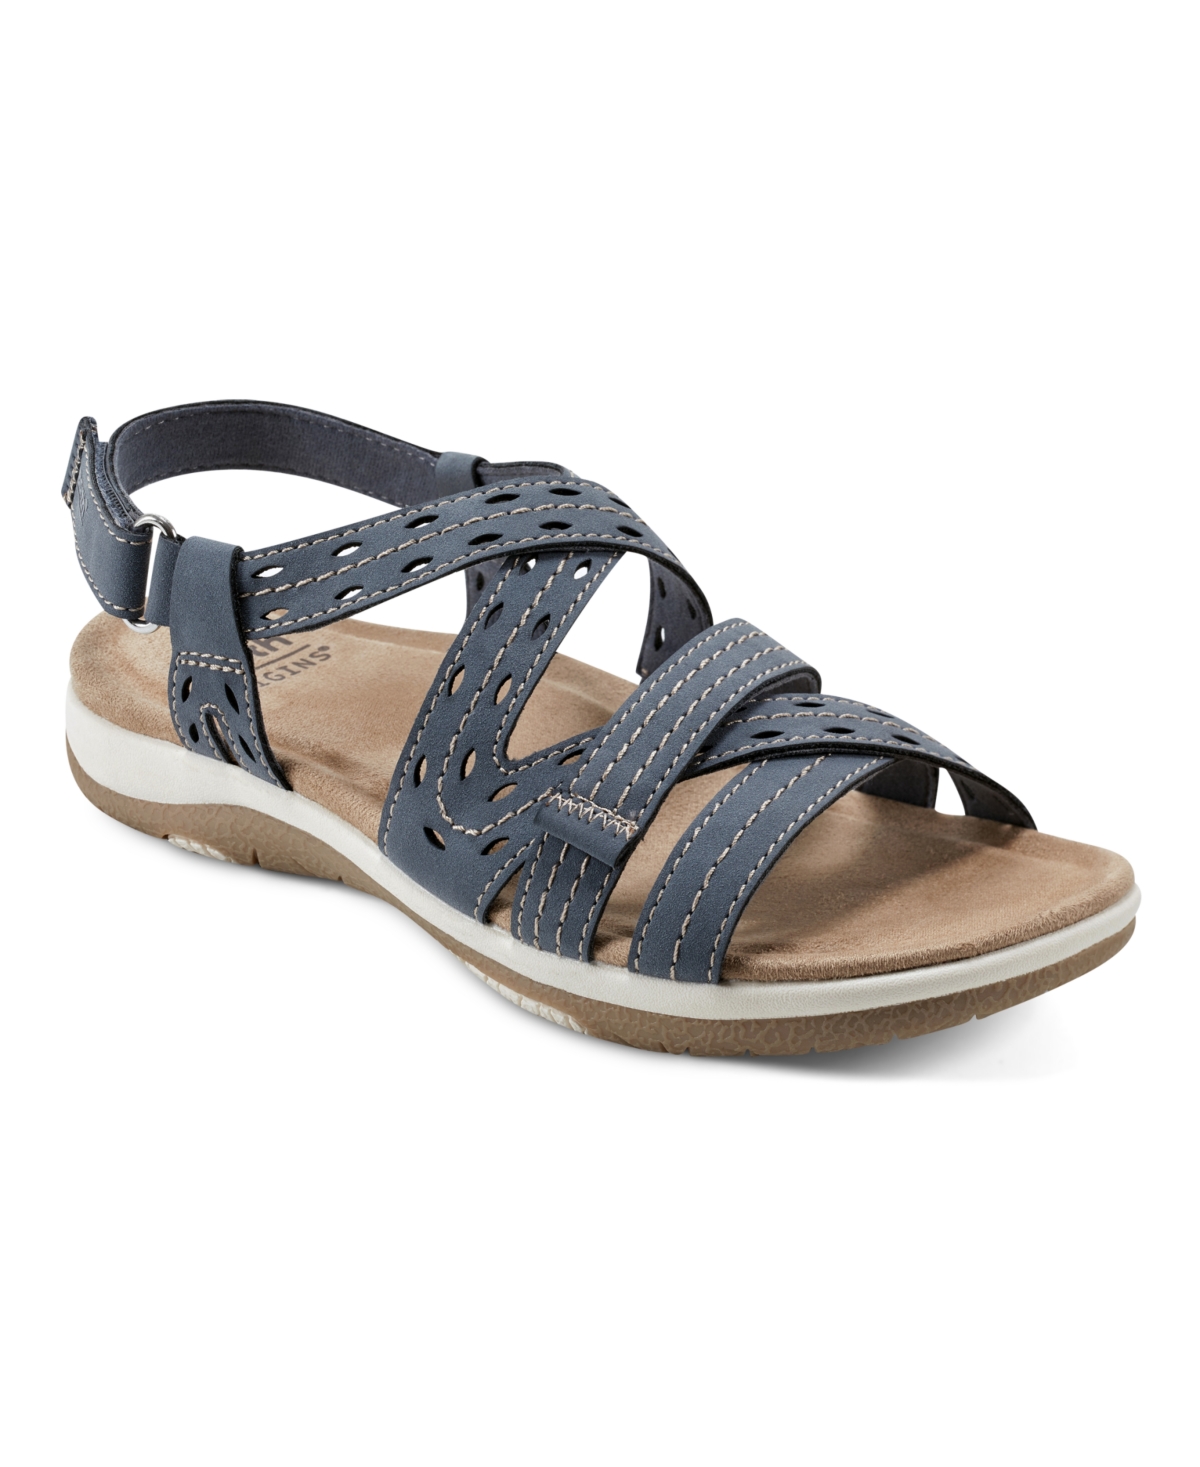 Earth Women's Sass Round Toe Strappy Casual Flat Sandals Women's Shoes